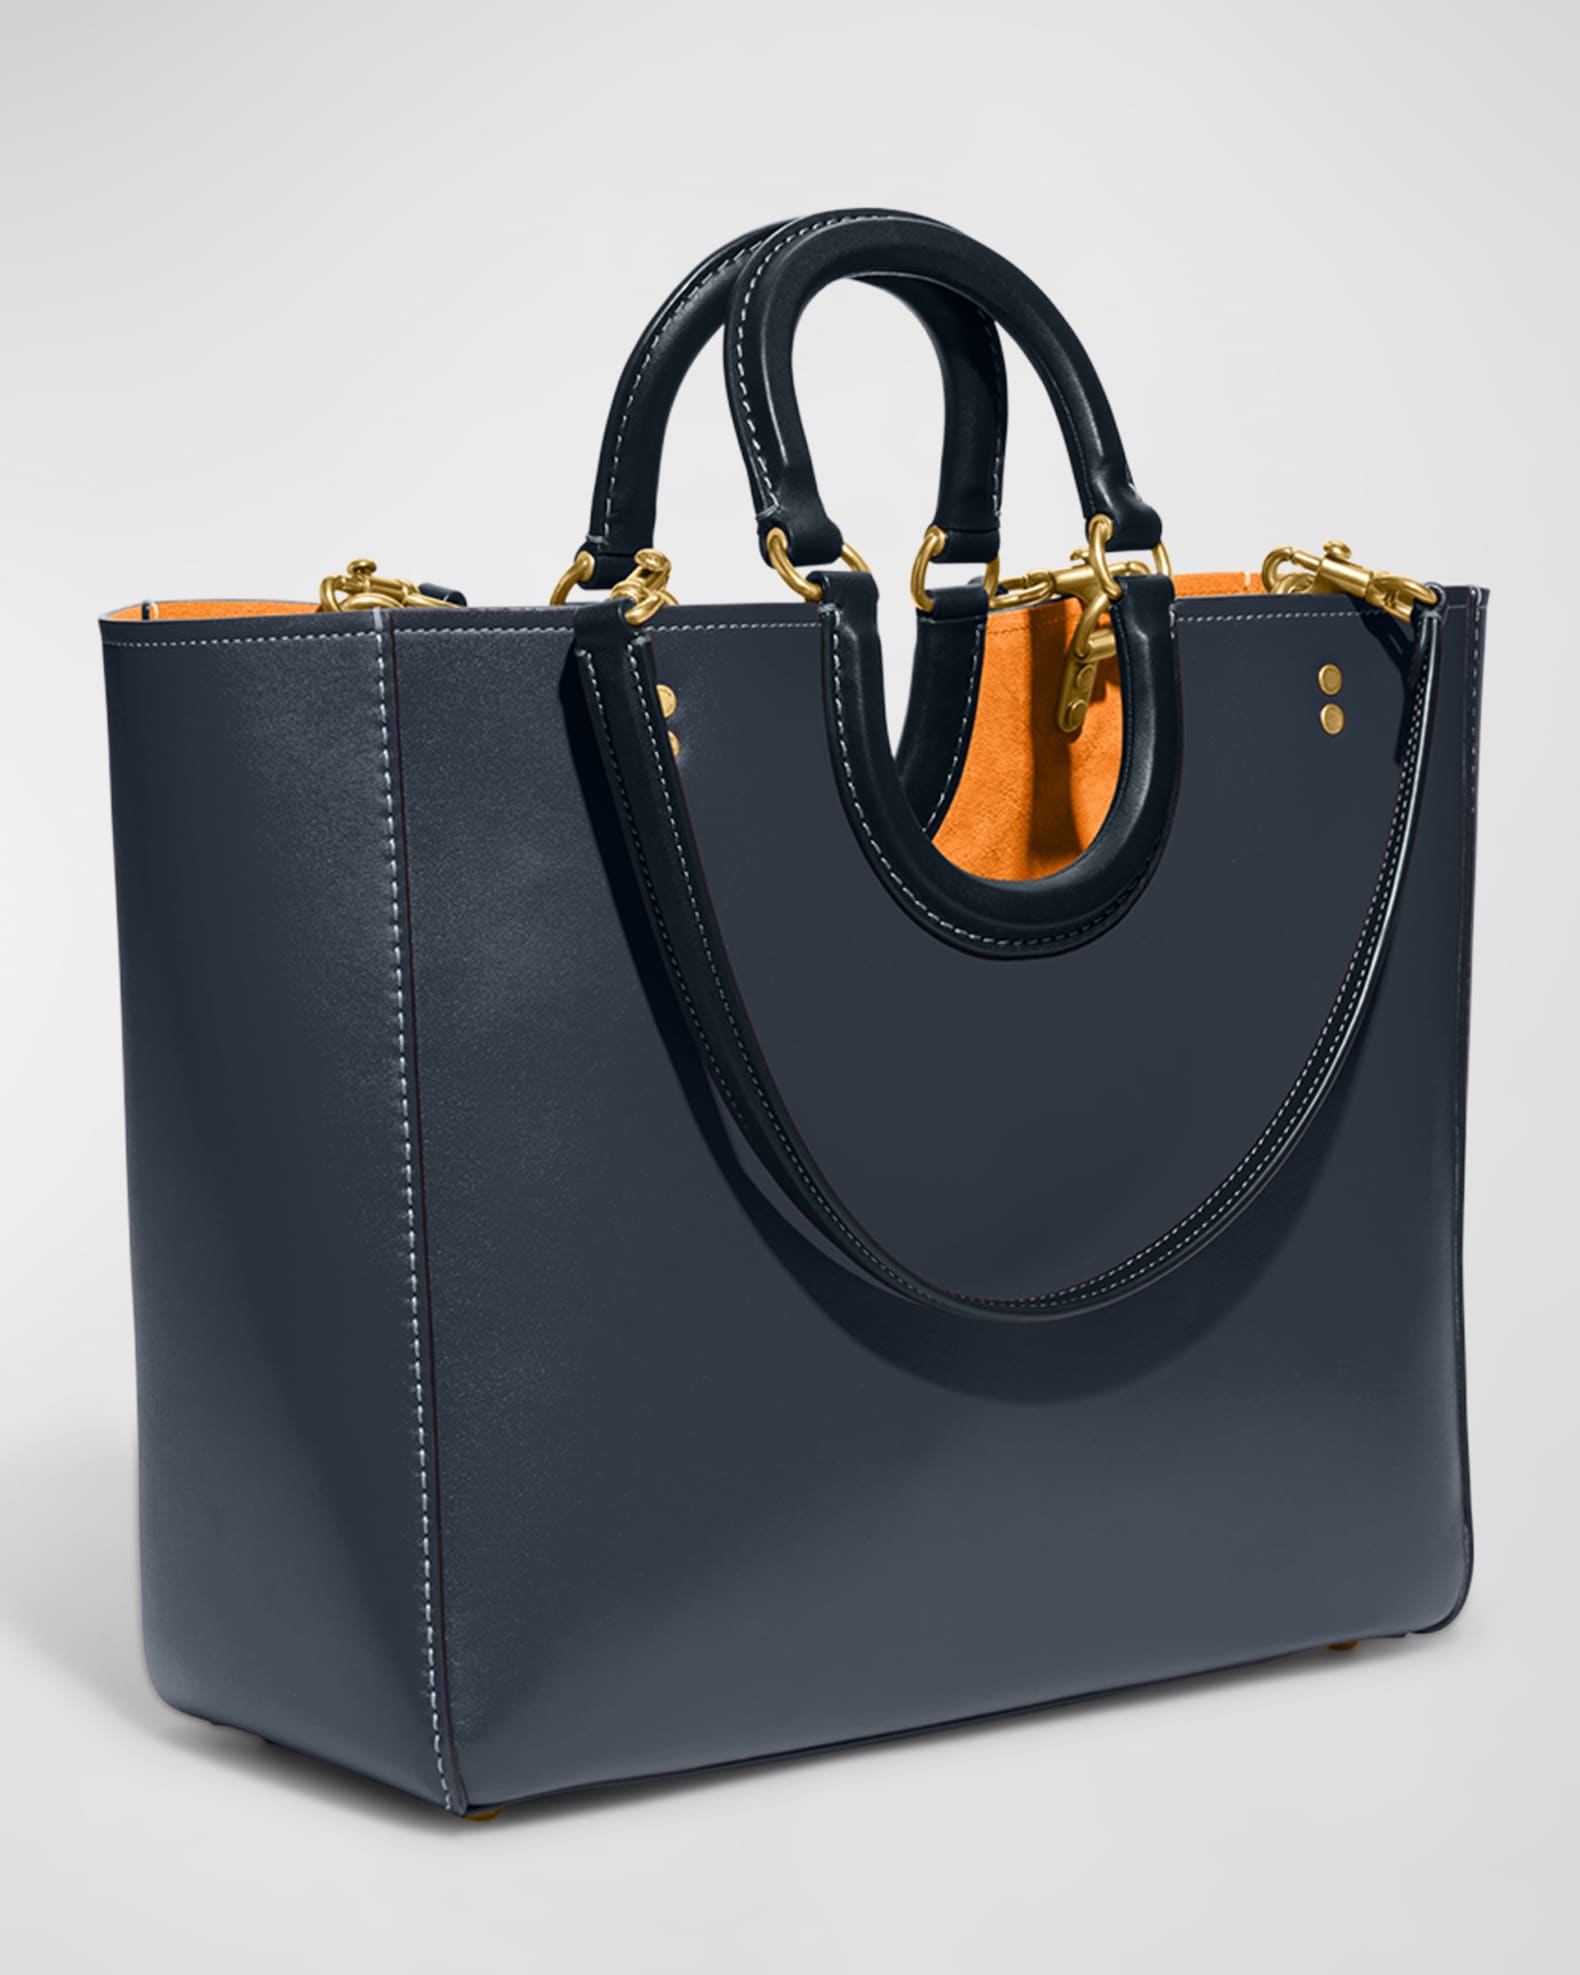 Coach Rae Colorblock Leather Tote Bag